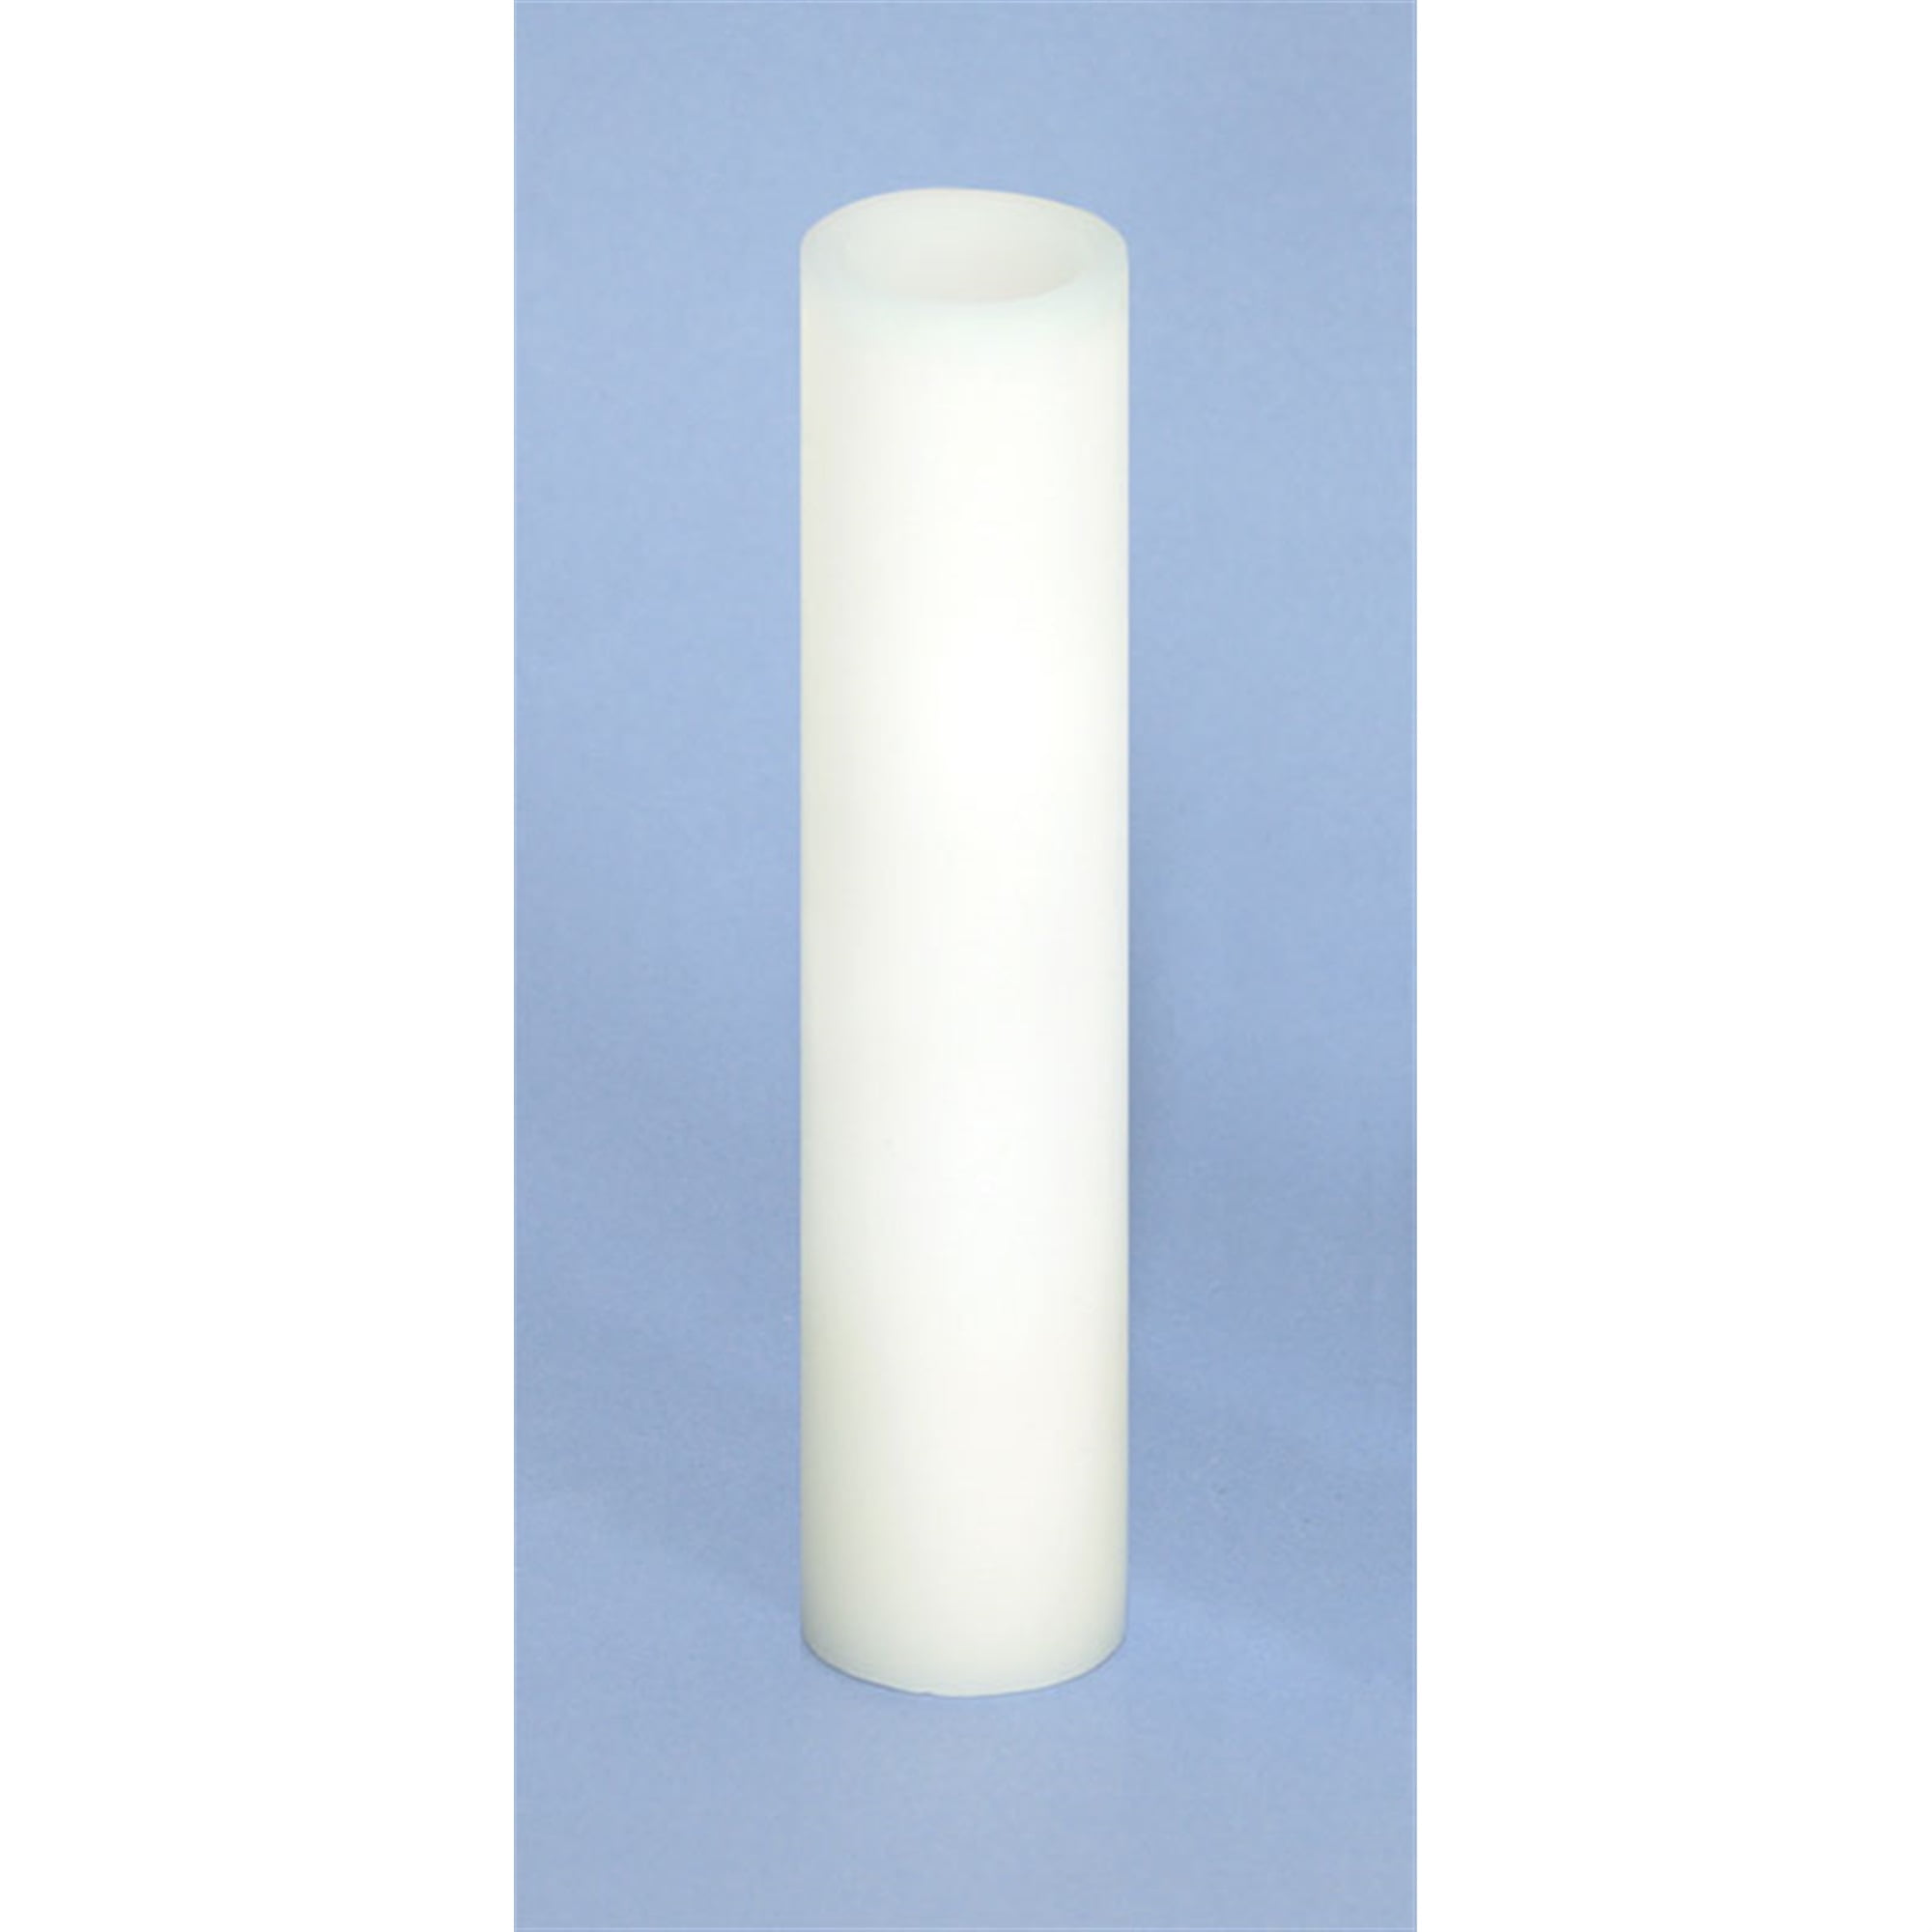 LED Wax Pillar Candle (Set of 6) 1.75"Dx8"H Wax/Plastic - 2 AA Batteries Not Incld